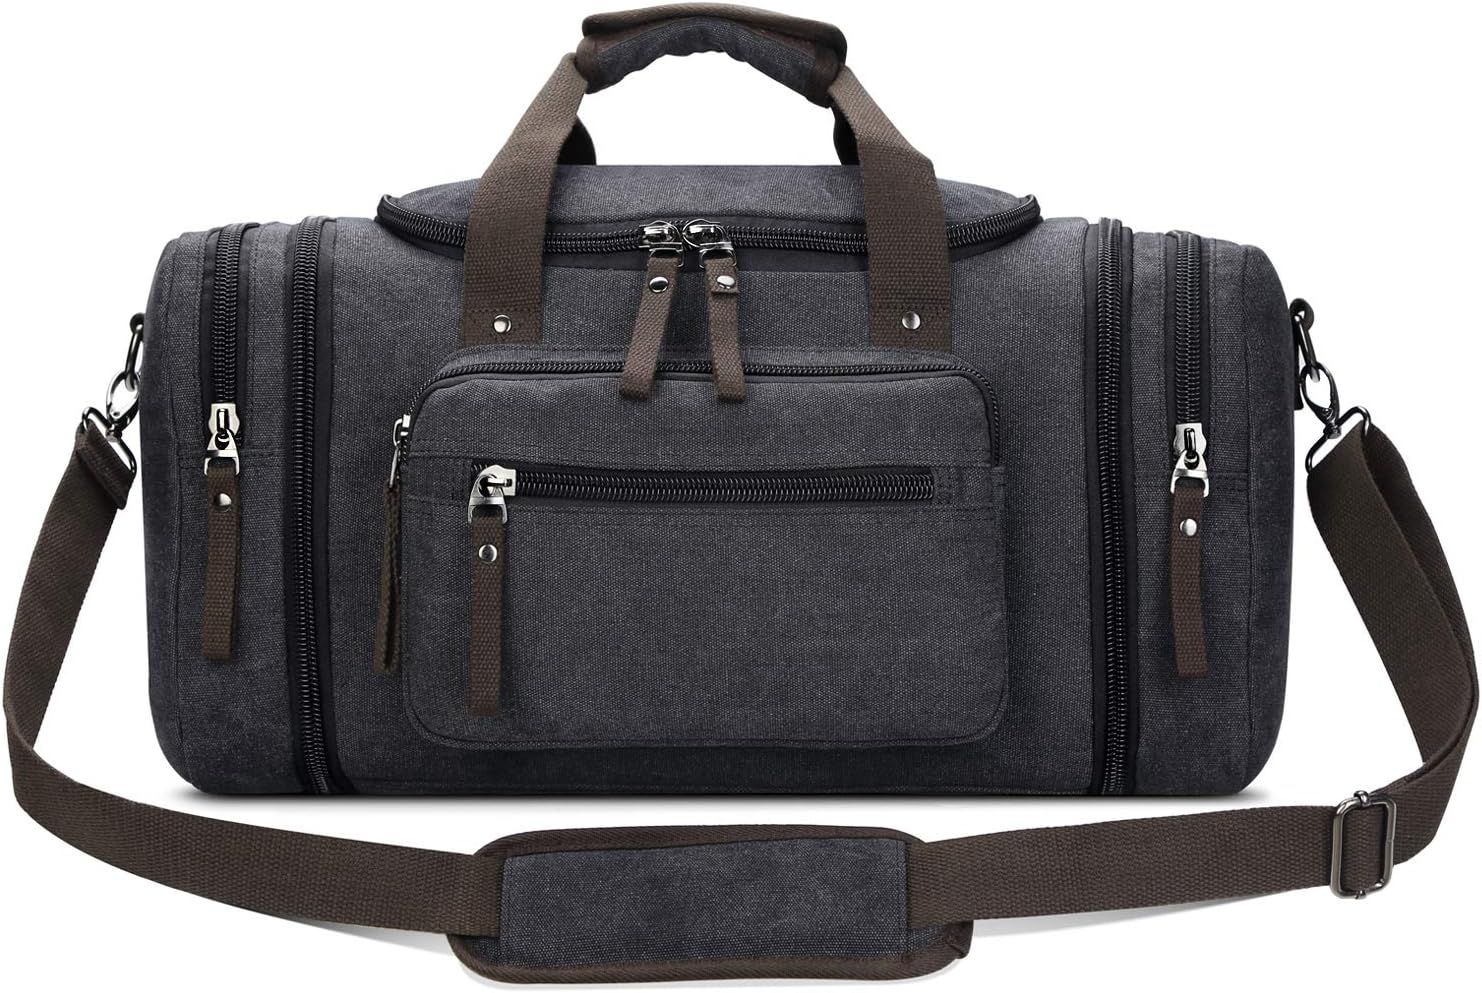 Toupons Canvas Travel Duffel Bag for Men Birthday Gifts Overnight Weekend Bag (Black ) | Amazon (US)